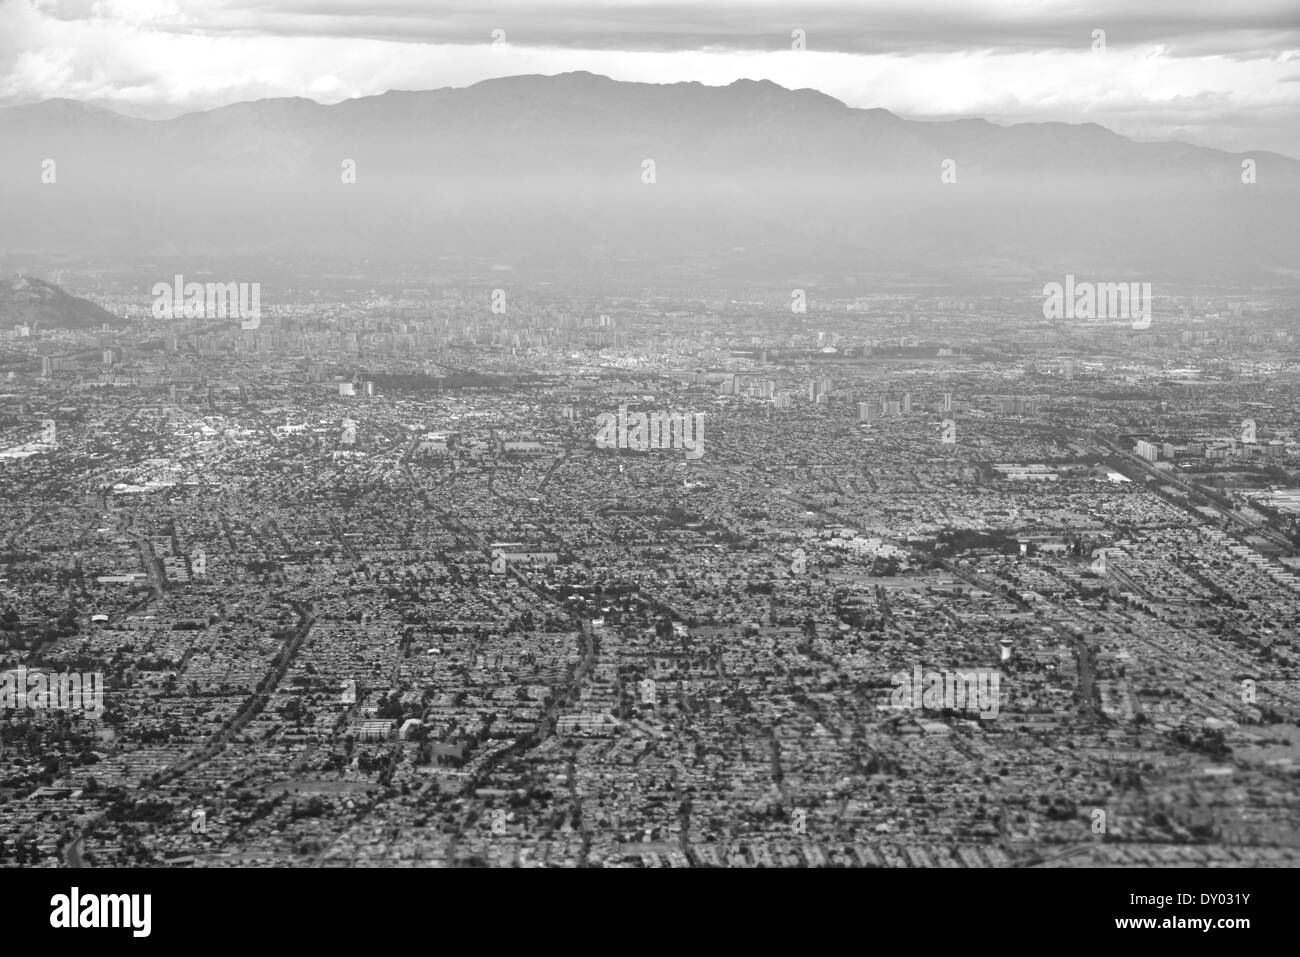 Aerial view of Santiago de Chile, South America Black and White whit mountains on background. Stock Photo